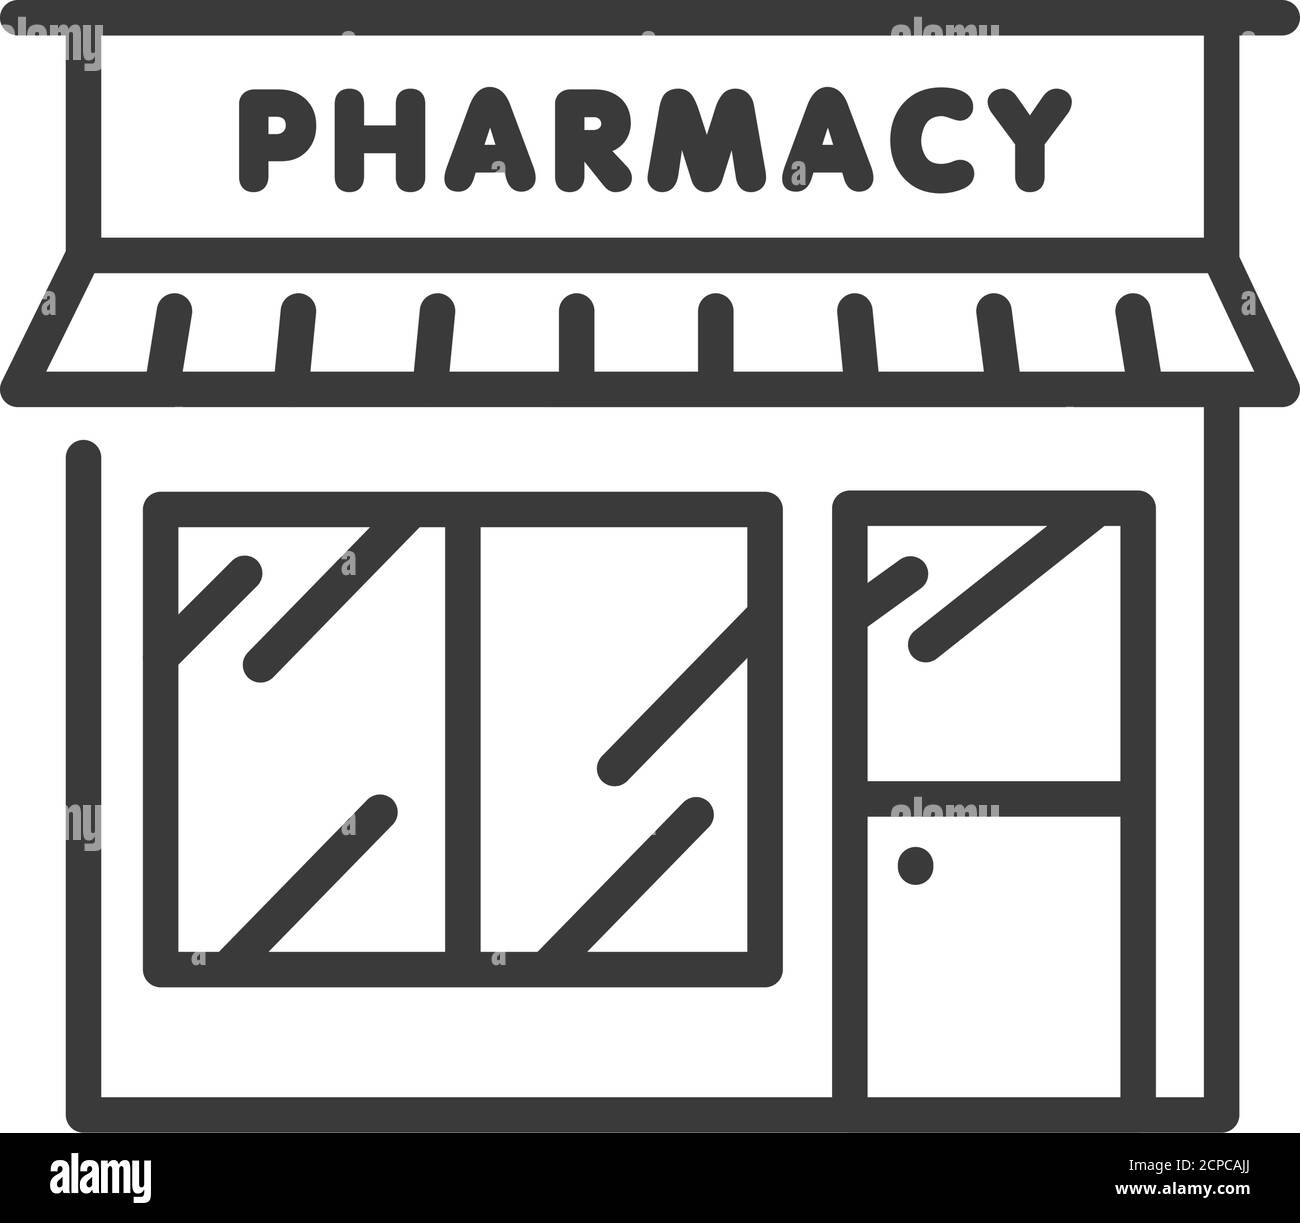 Pharmacy front black icon. Drug store. Sign for web page, mobile app, banner, social media. Pictogram UI UX user interface. Vector clipart. Editable Stock Vector